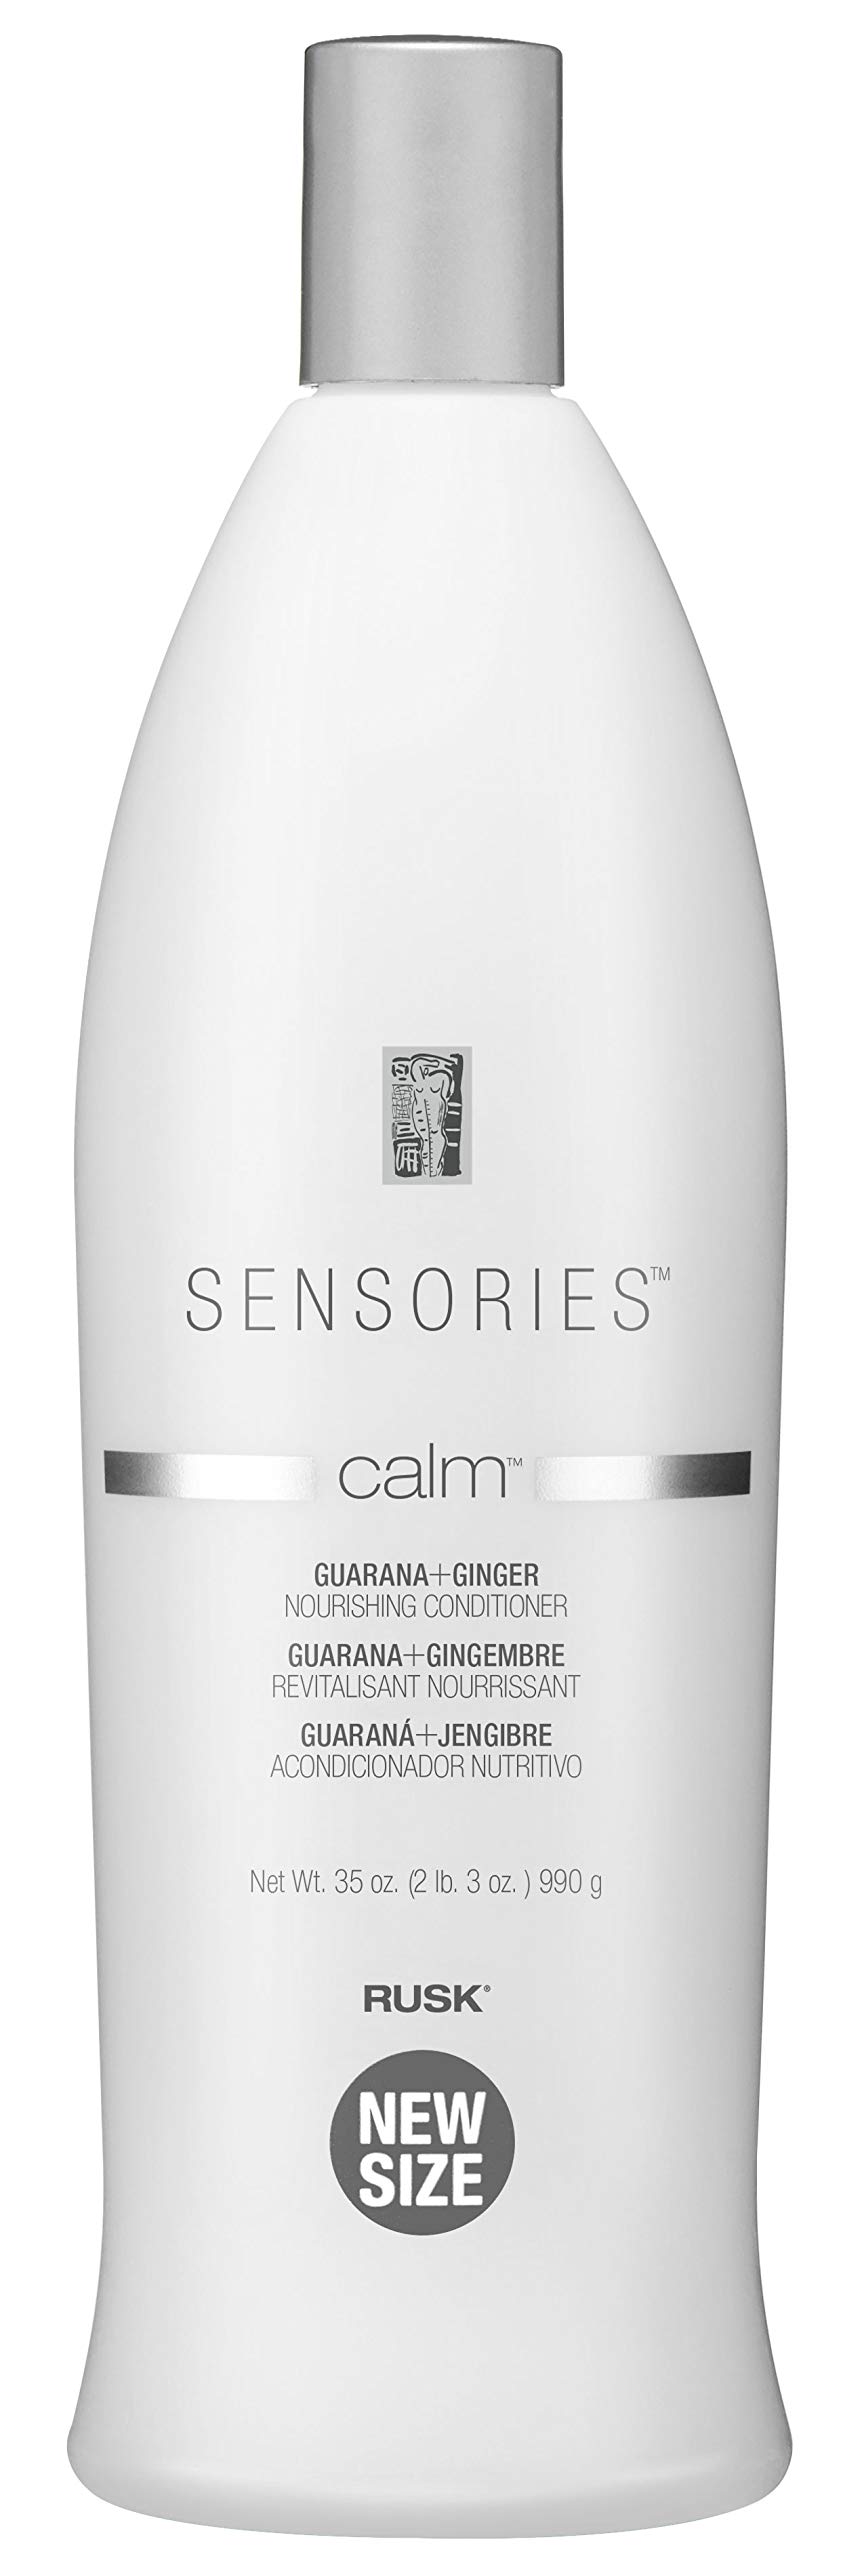 RUSK Sensories Calm Guarana and Ginger Nourishing, Guarana and Ginger Vegetable Protein to De-Stress Damaged Hair